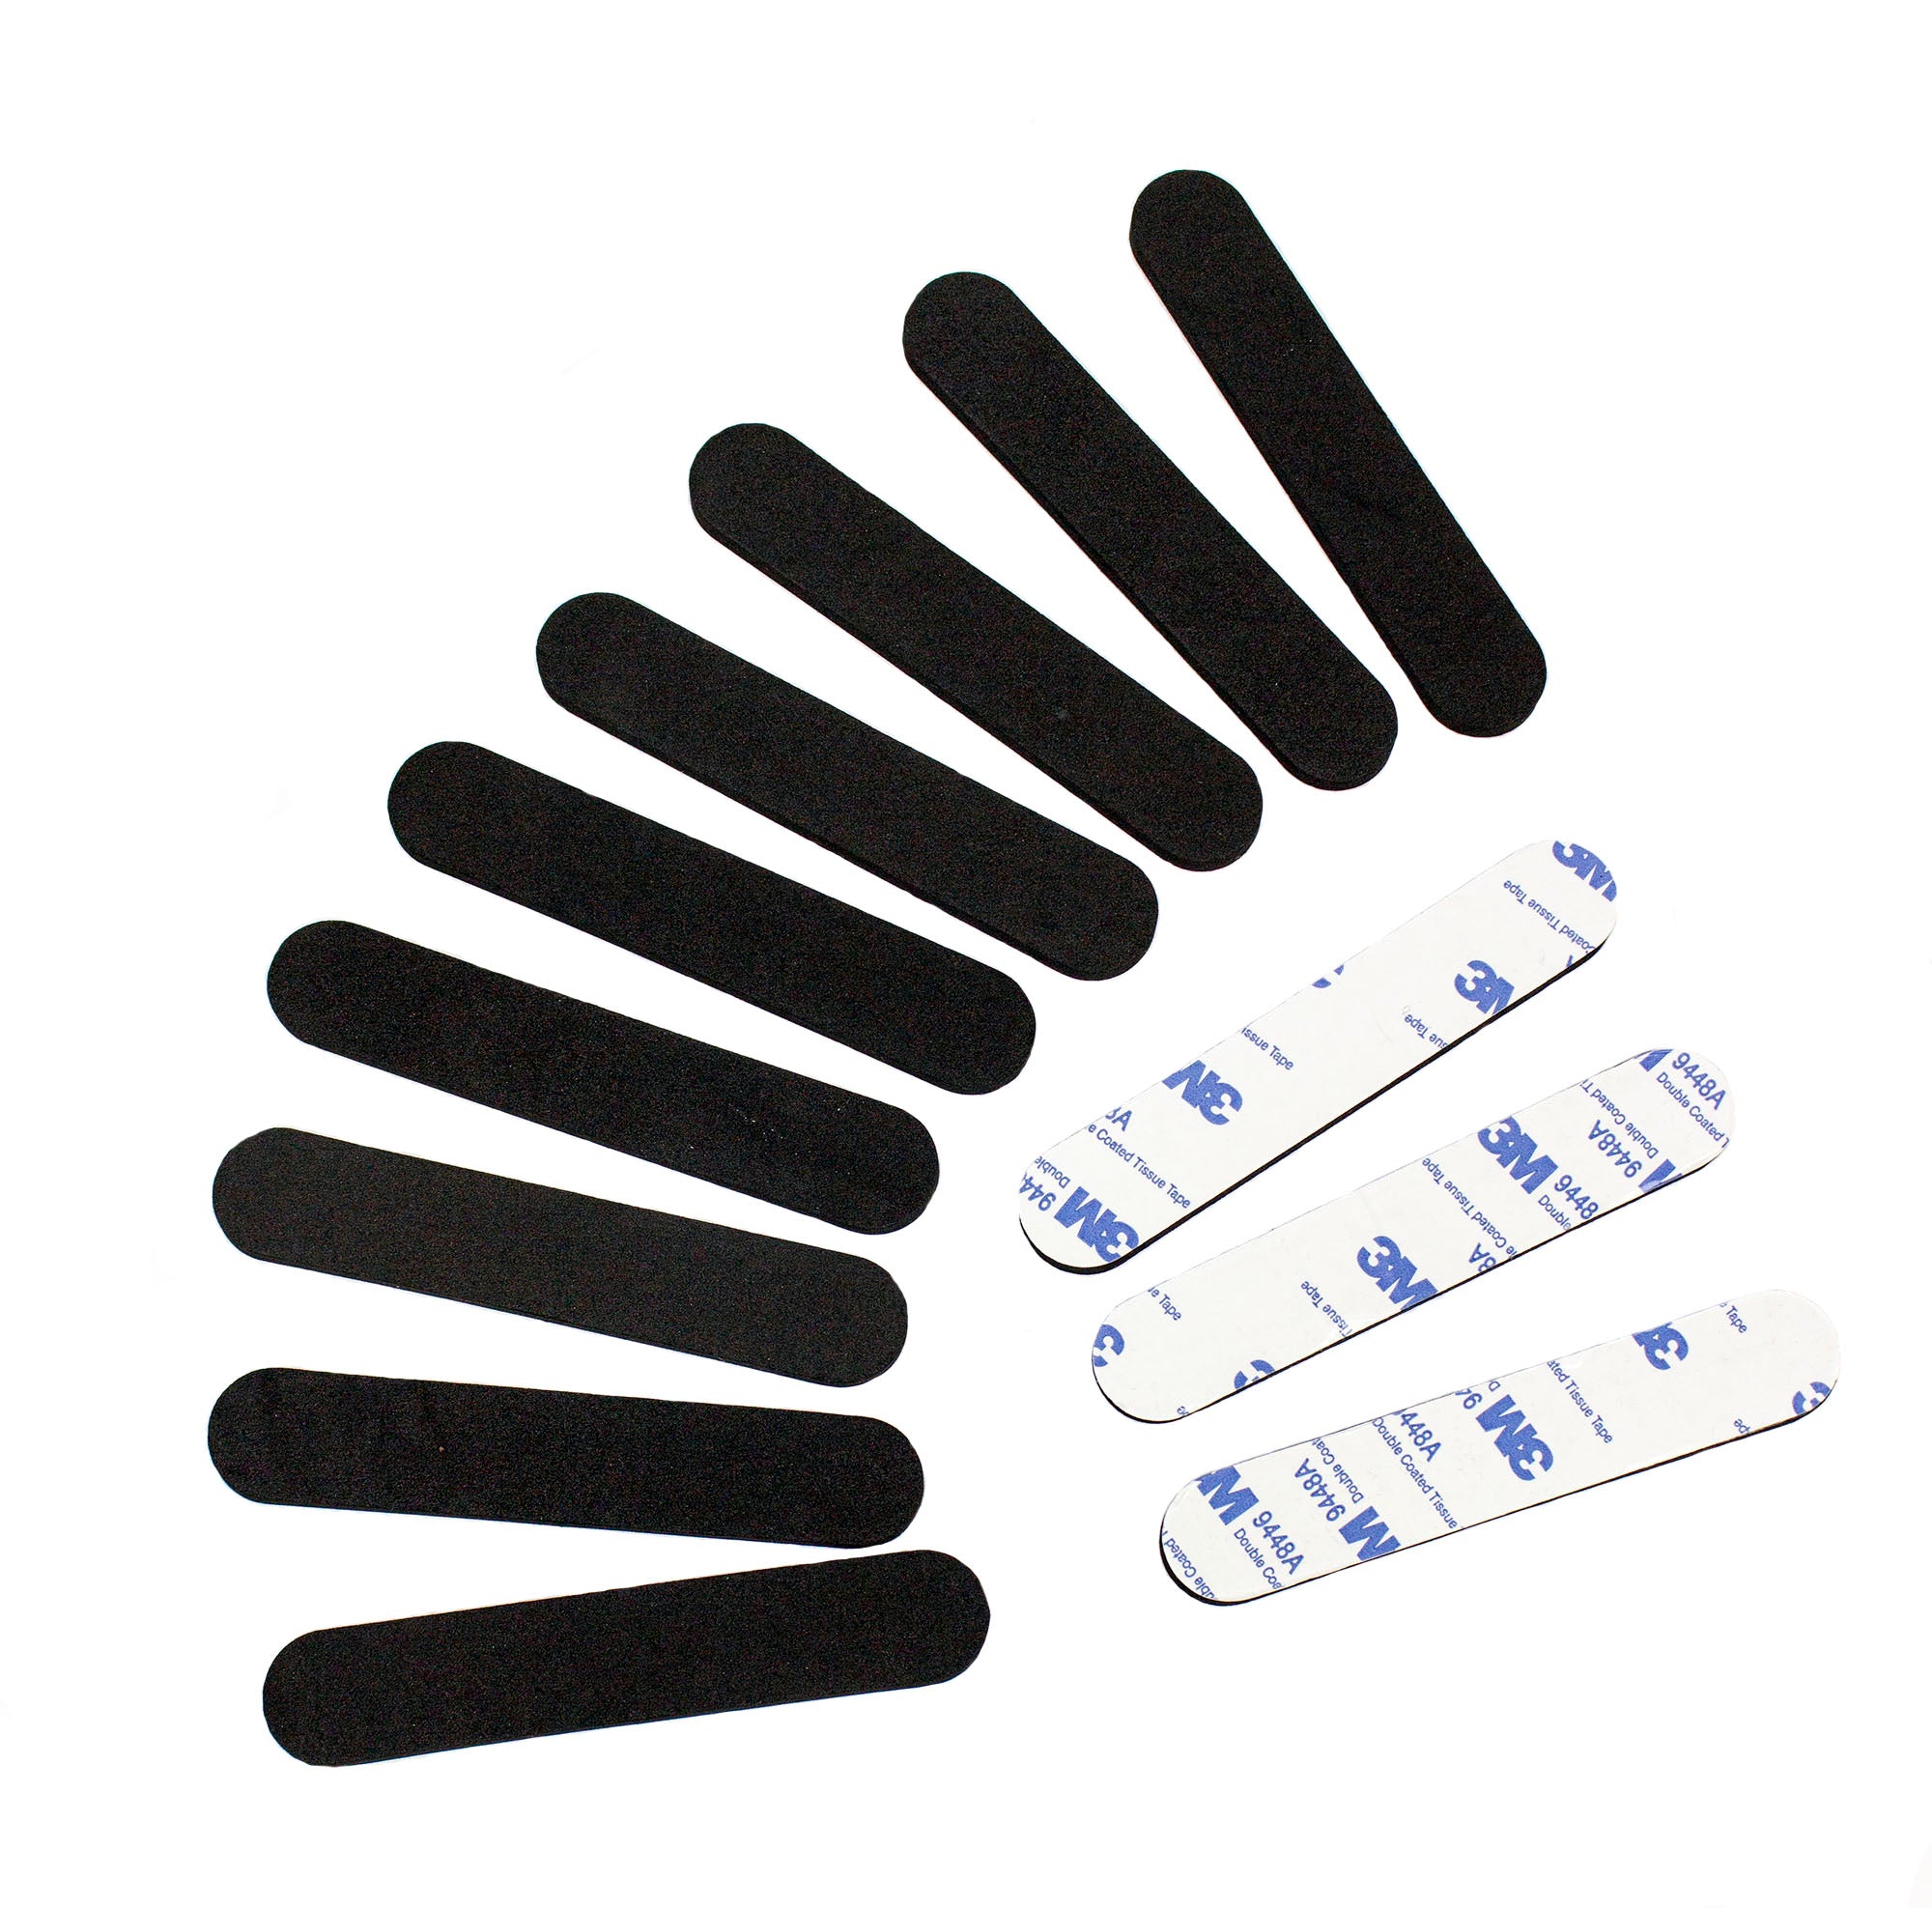 Hat Size Reducer Foam Adhesive Strips - Package of 12 Pieces